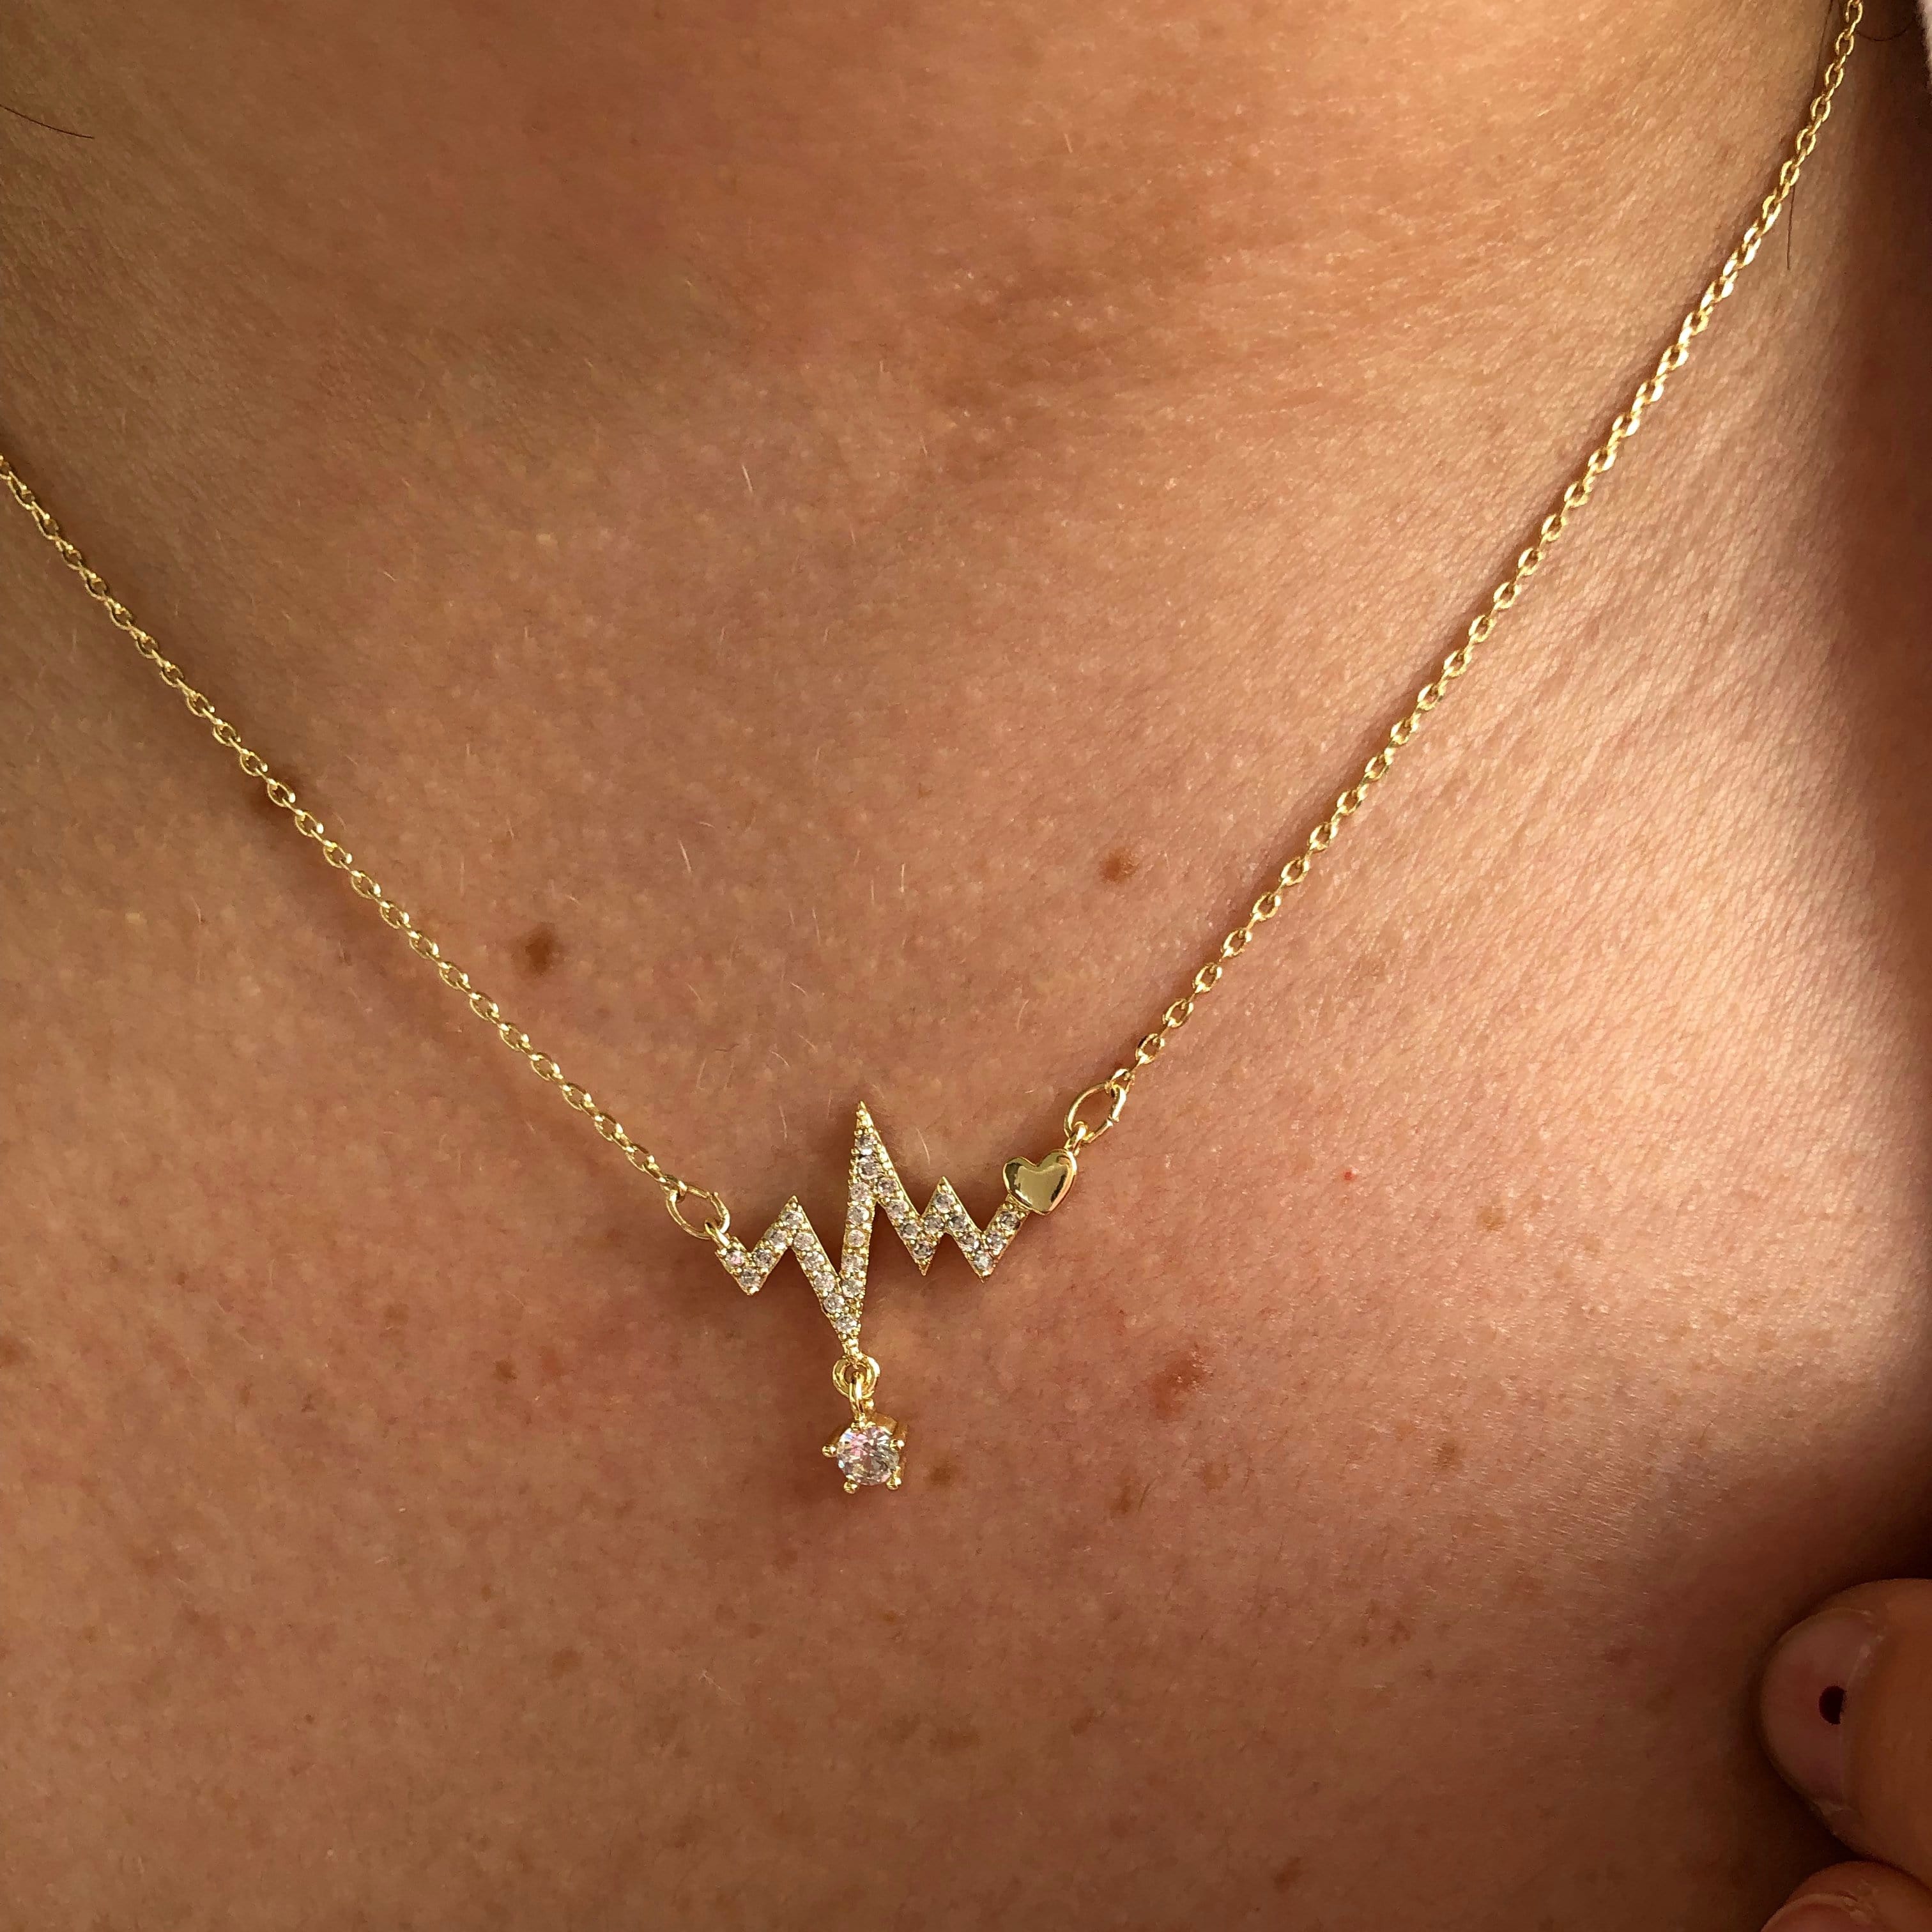 Life Line Necklace